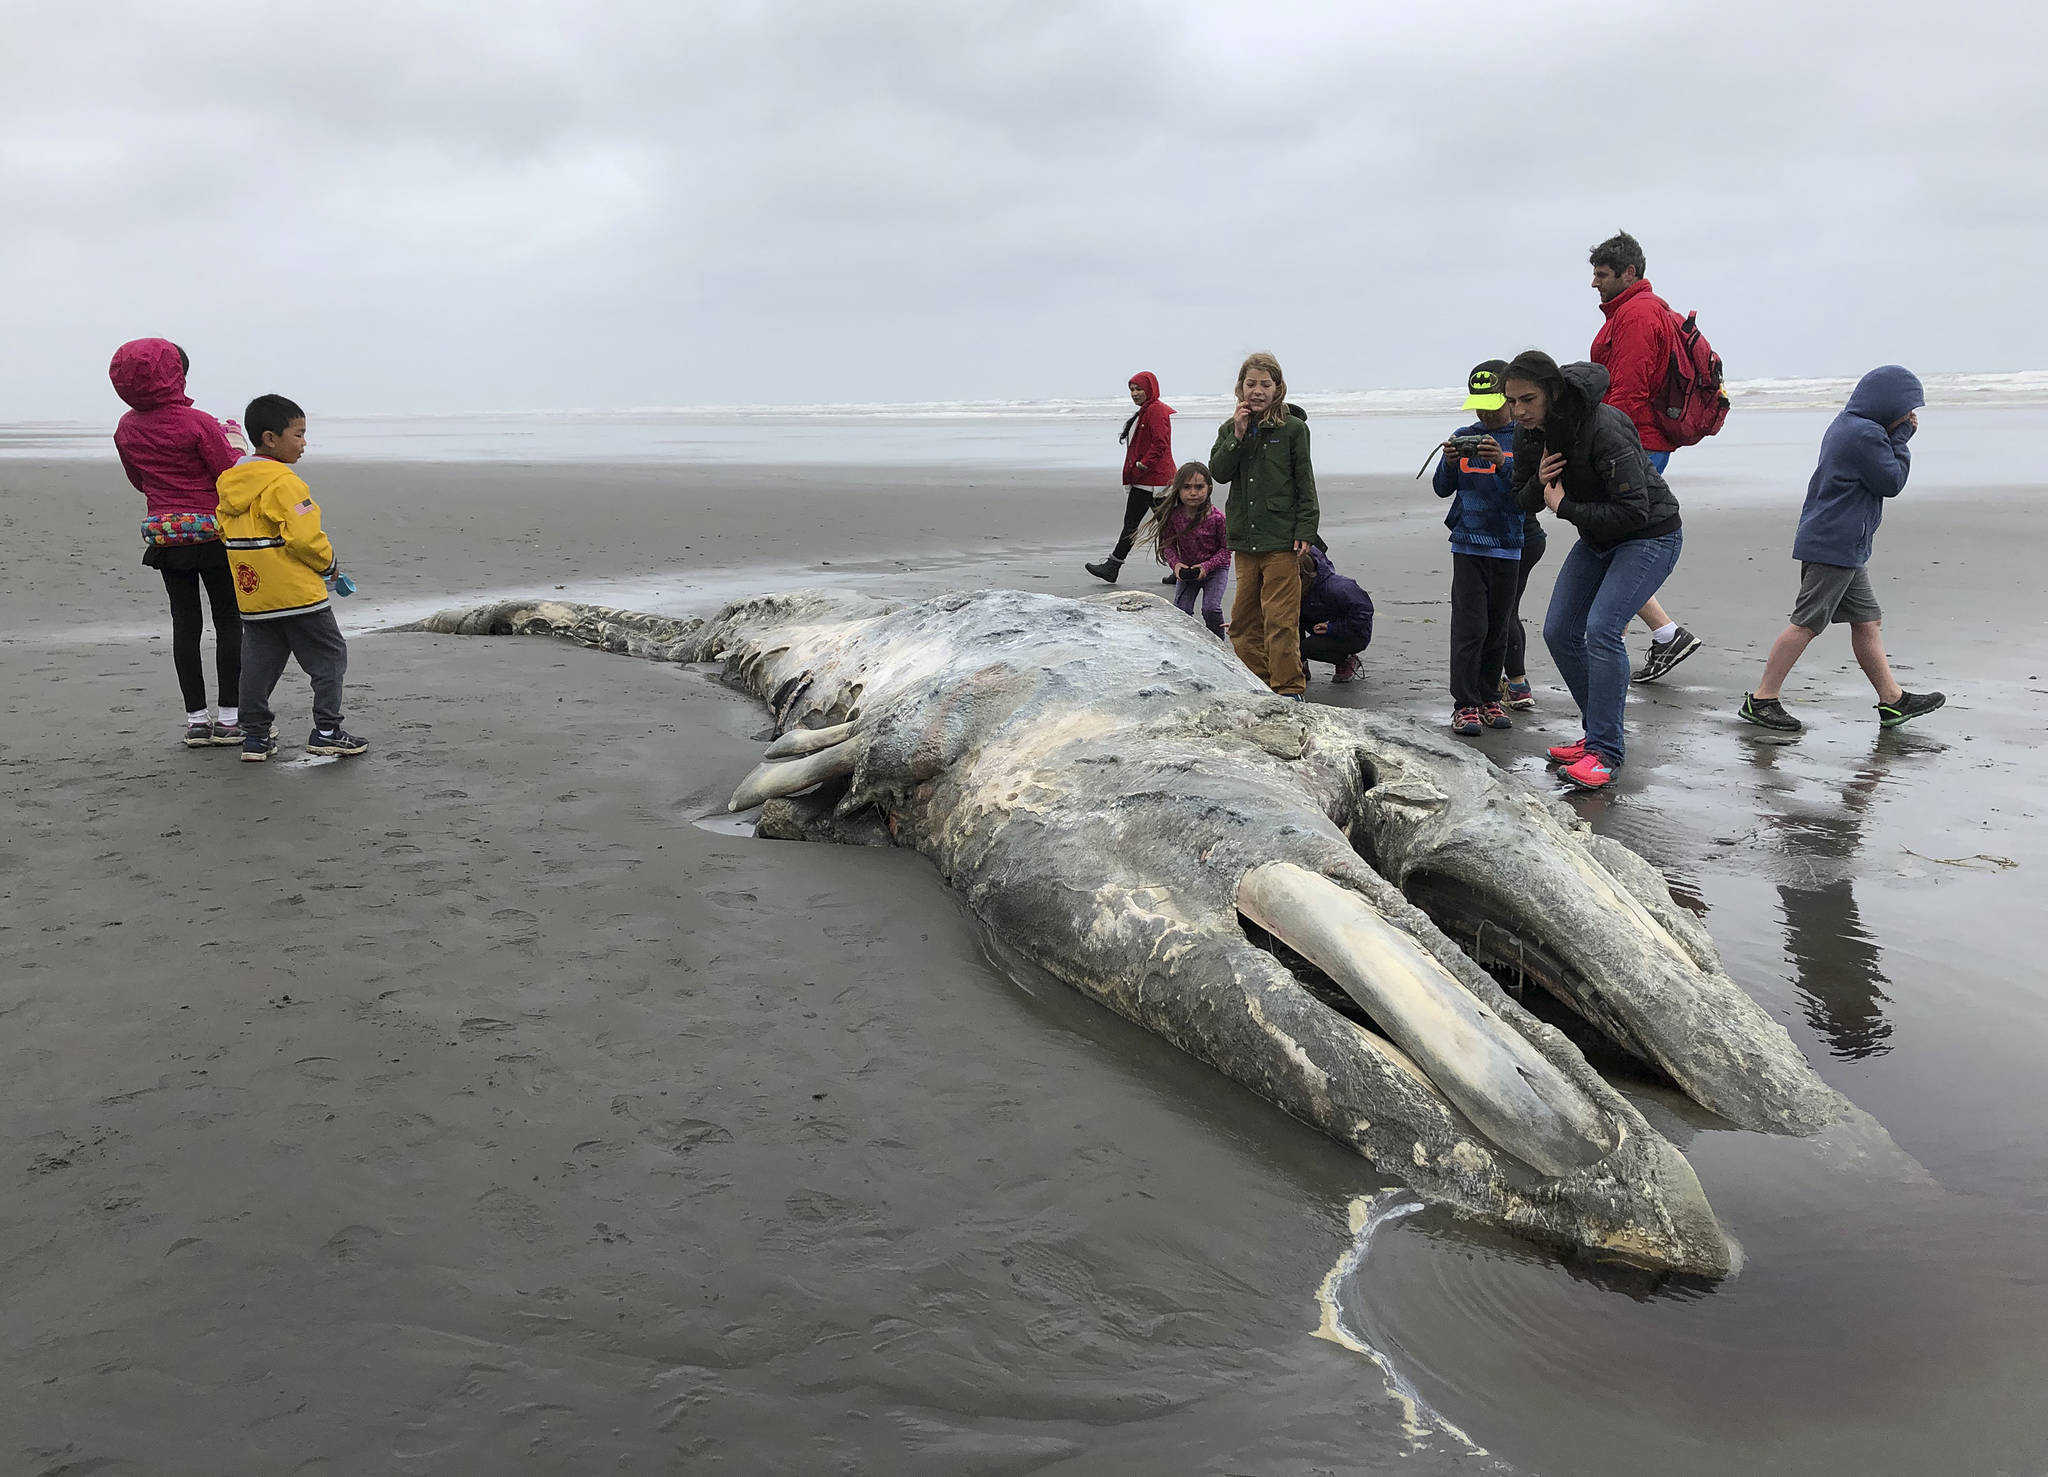 In this May 24, 2019 photo, teachers and students from Northwest Montessori School in Seattle examine the carcass of a gray whale after it washed up on the coast of Washington’s Olympic Peninsula, just north of Kalaloch Campground in Olympic National Park. Federal scientists on Friday, May 31 opened an investigation into what is causing a spike in gray whale deaths along the West Coast this year. So far, about 70 whales have stranded on the coasts of Washington, Oregon, Alaska and California, the most since 2000. (AP Photo/Gene Johnson)